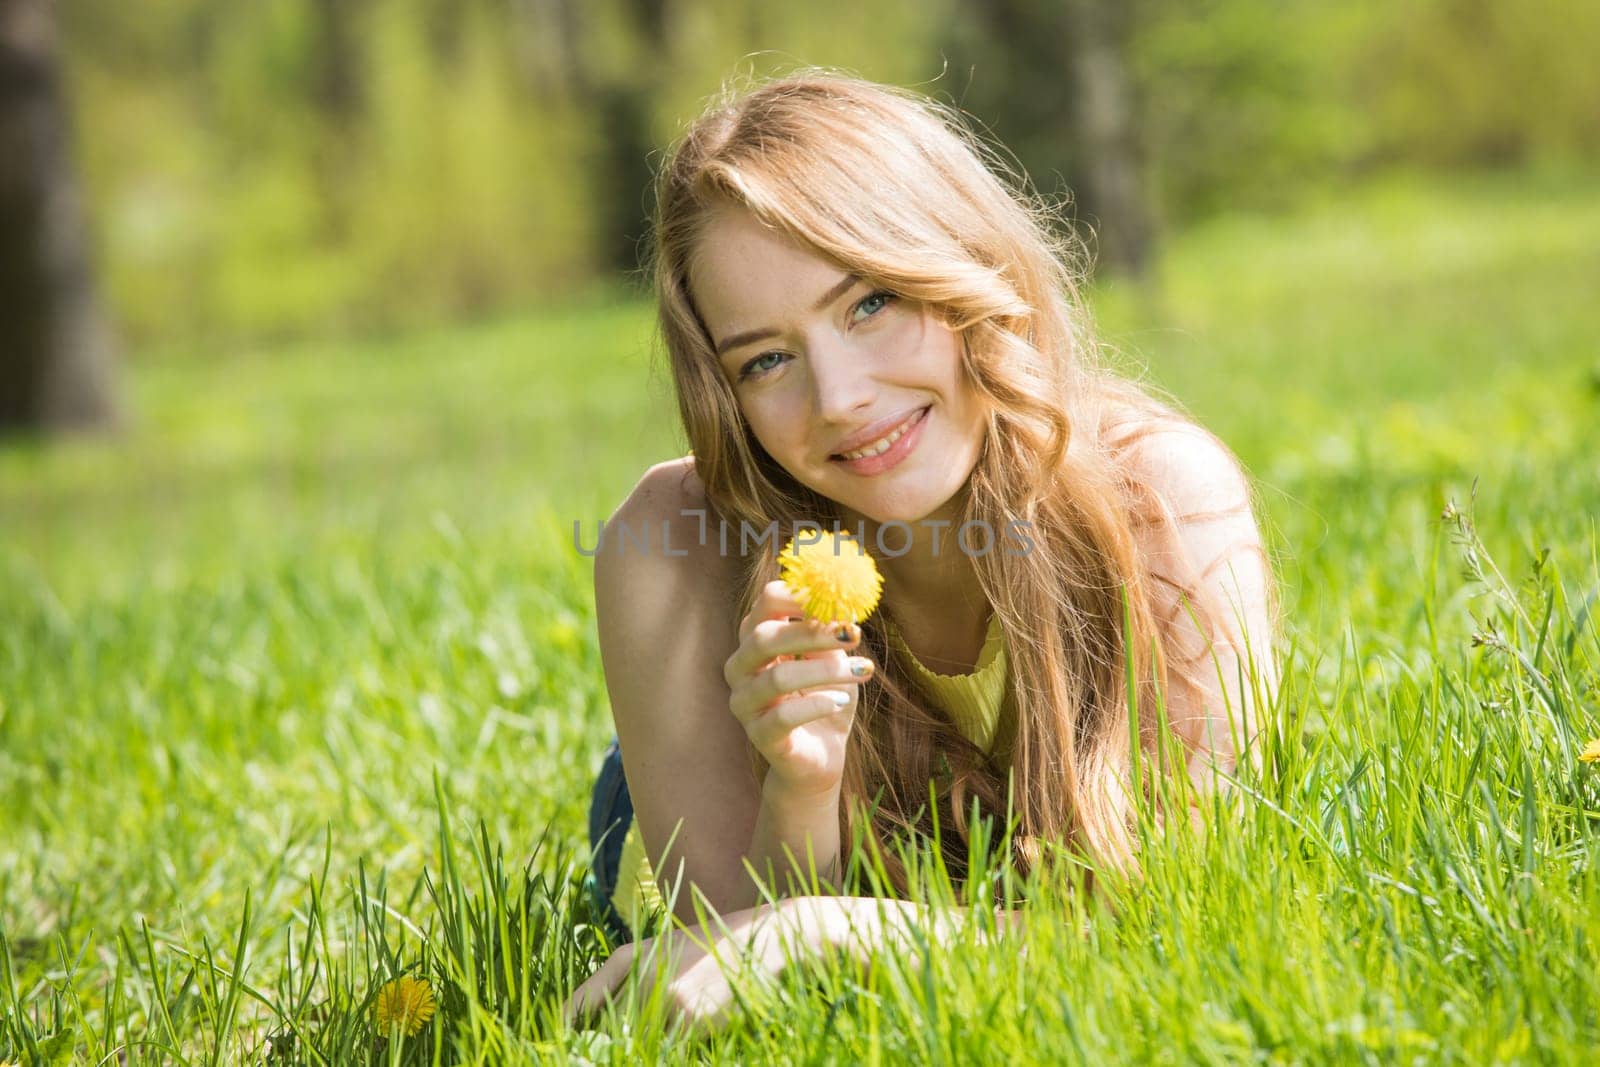 Young smiling woman on grass by Yellowj